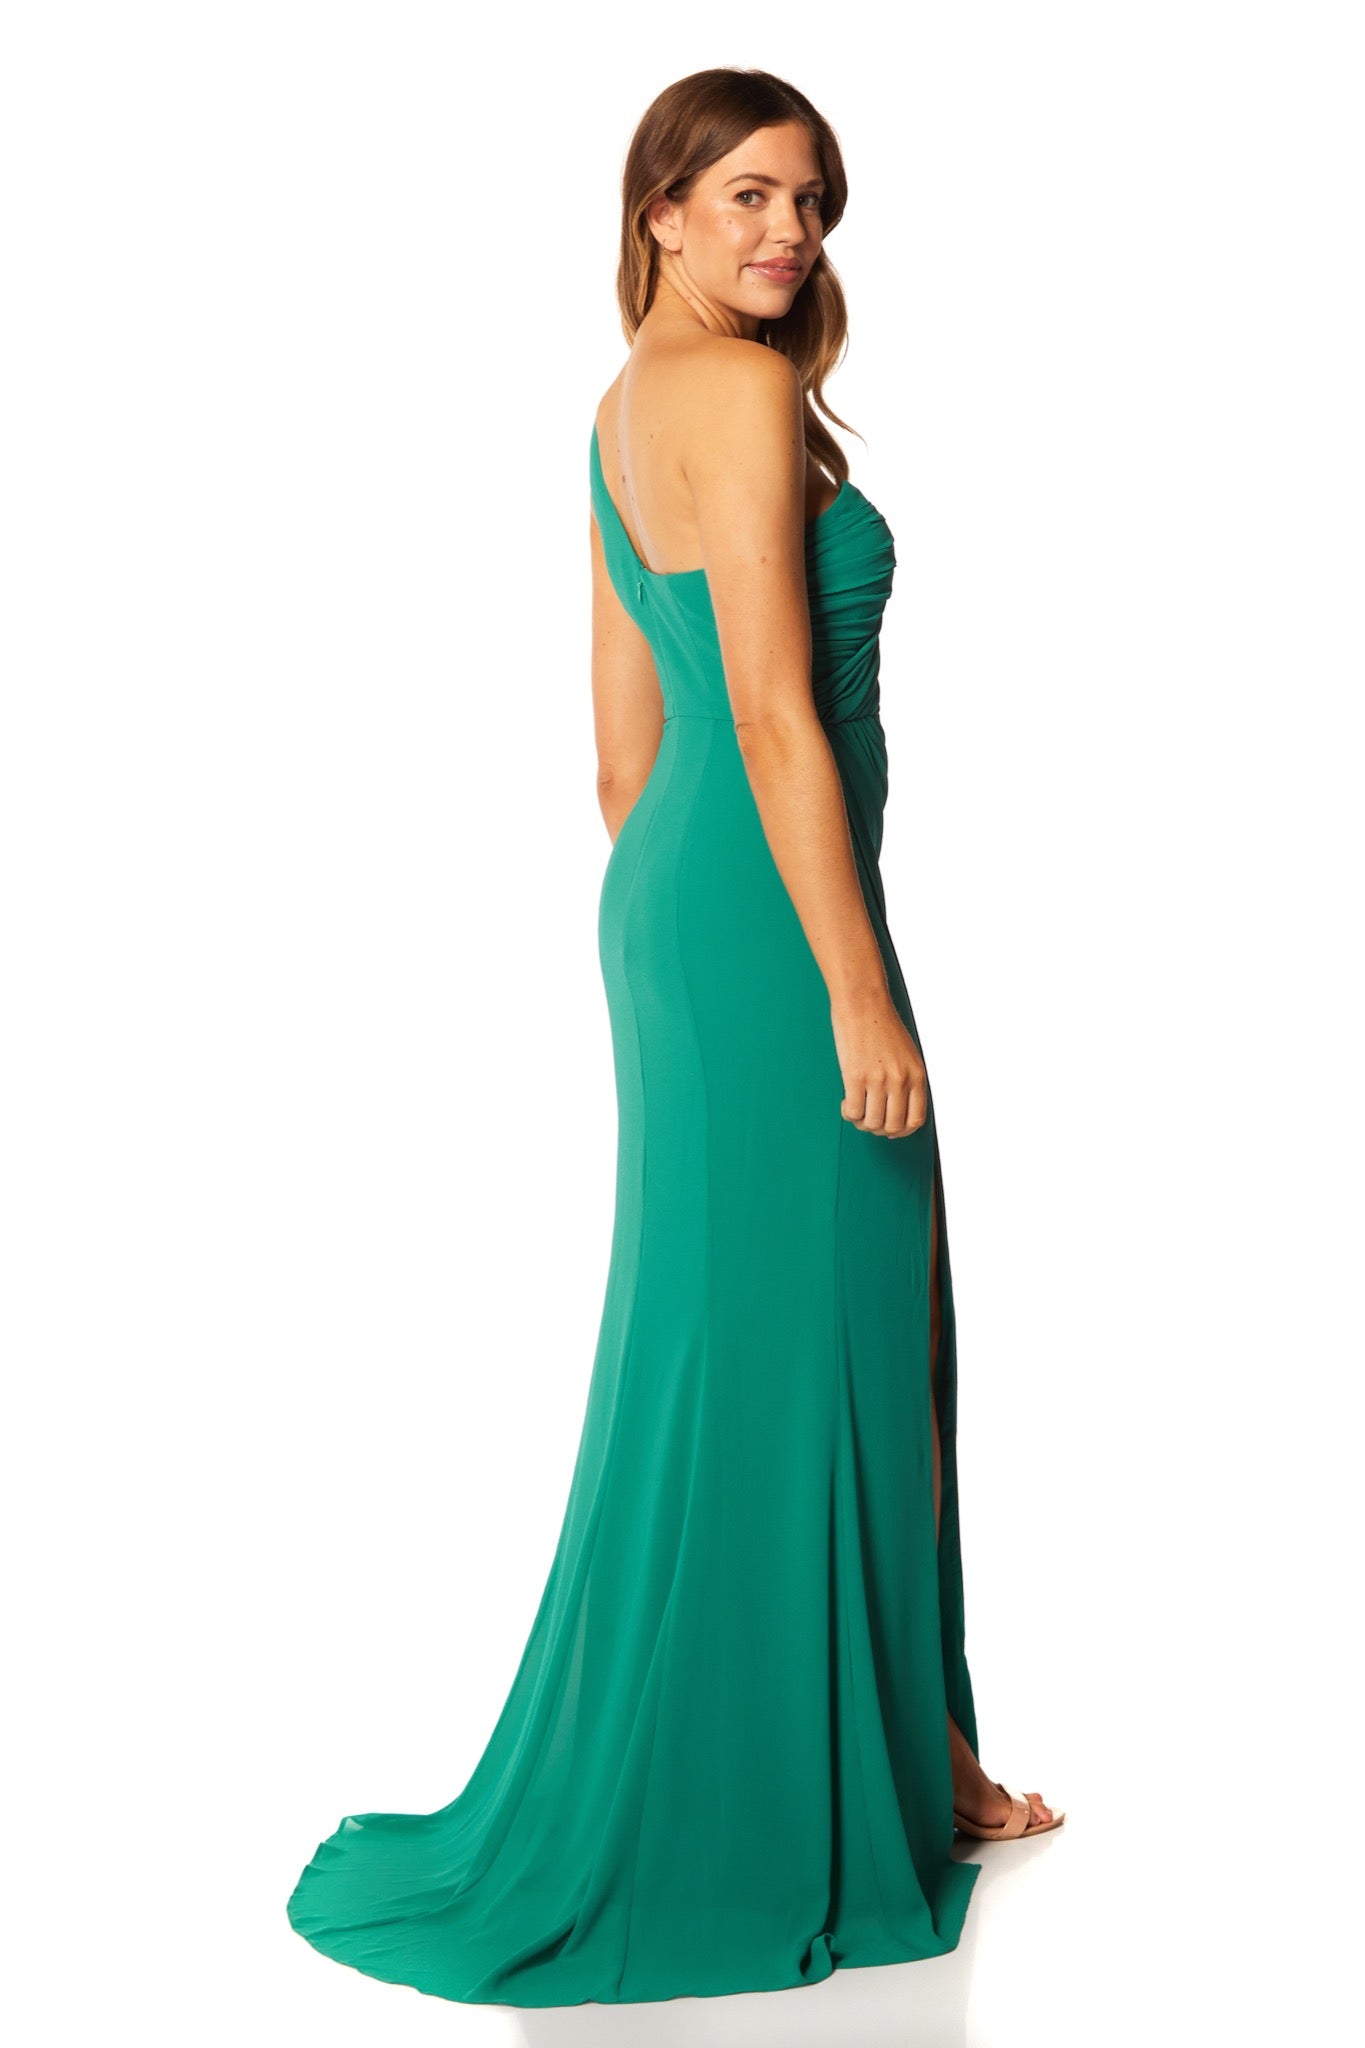 Olani One Shoulder Fishtail Maxi Dress with Ruched Bodice Detail